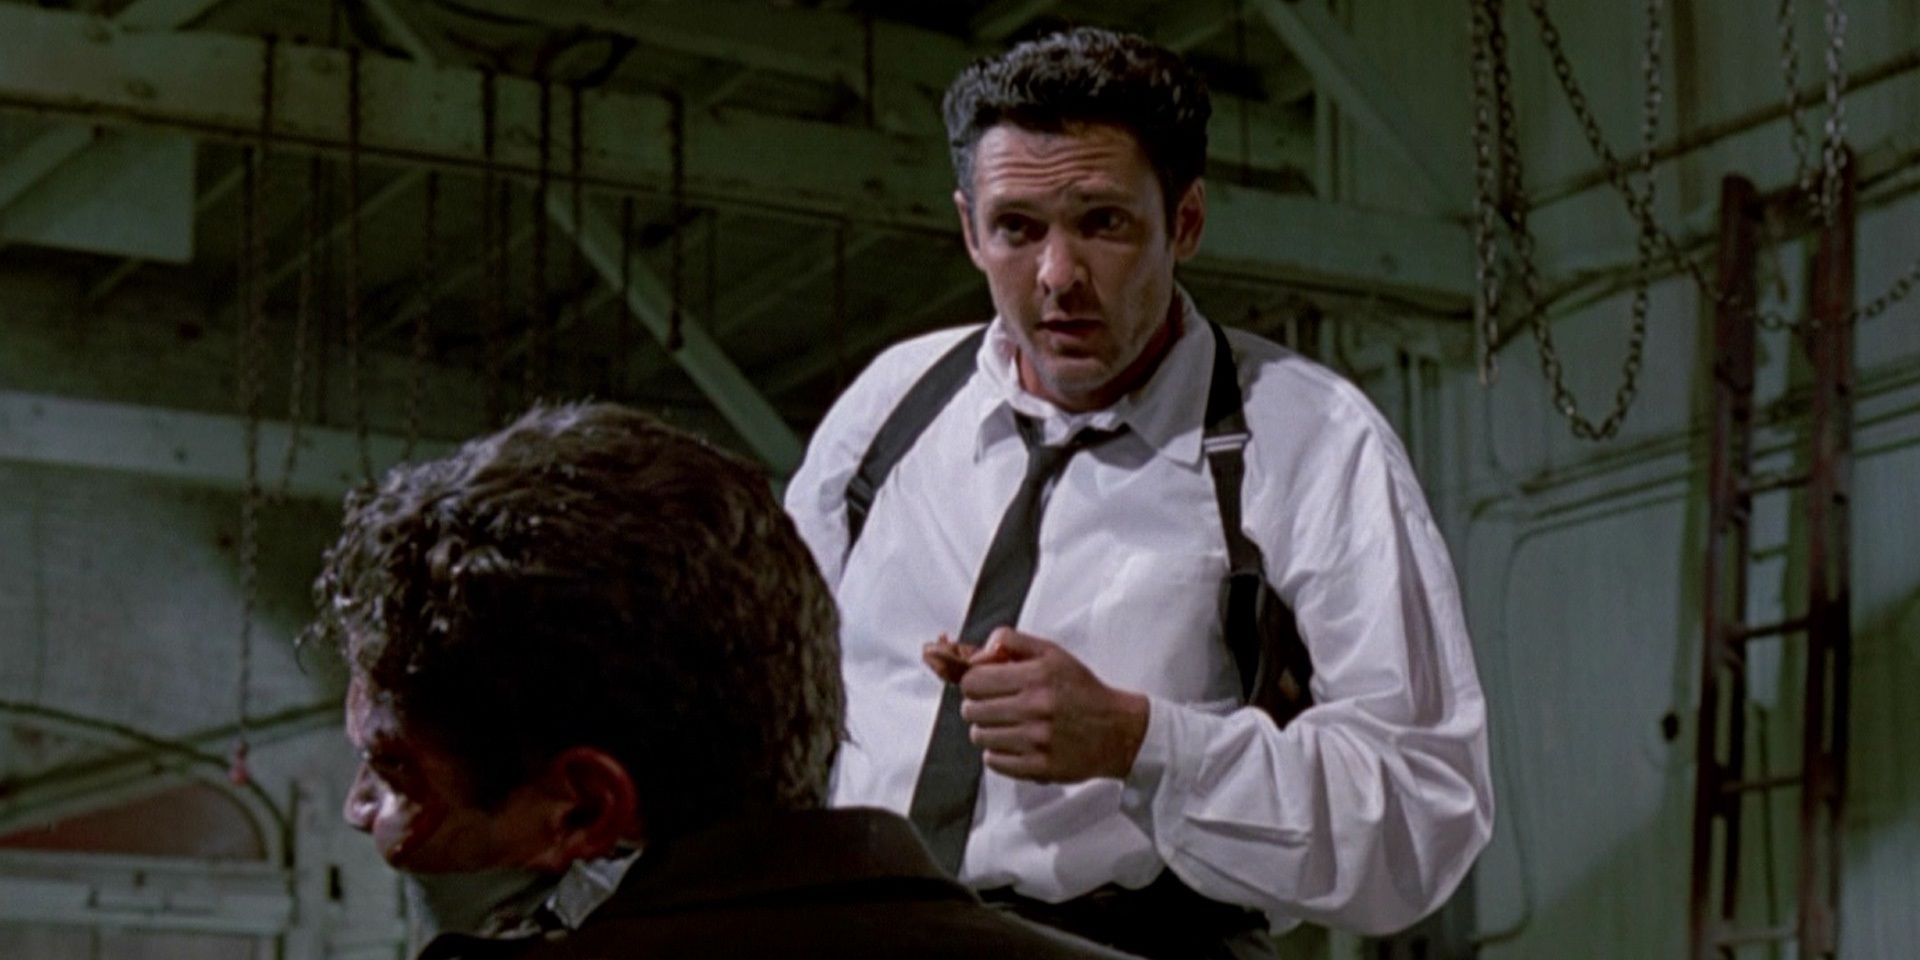 The torture scene in Reservoir Dogs